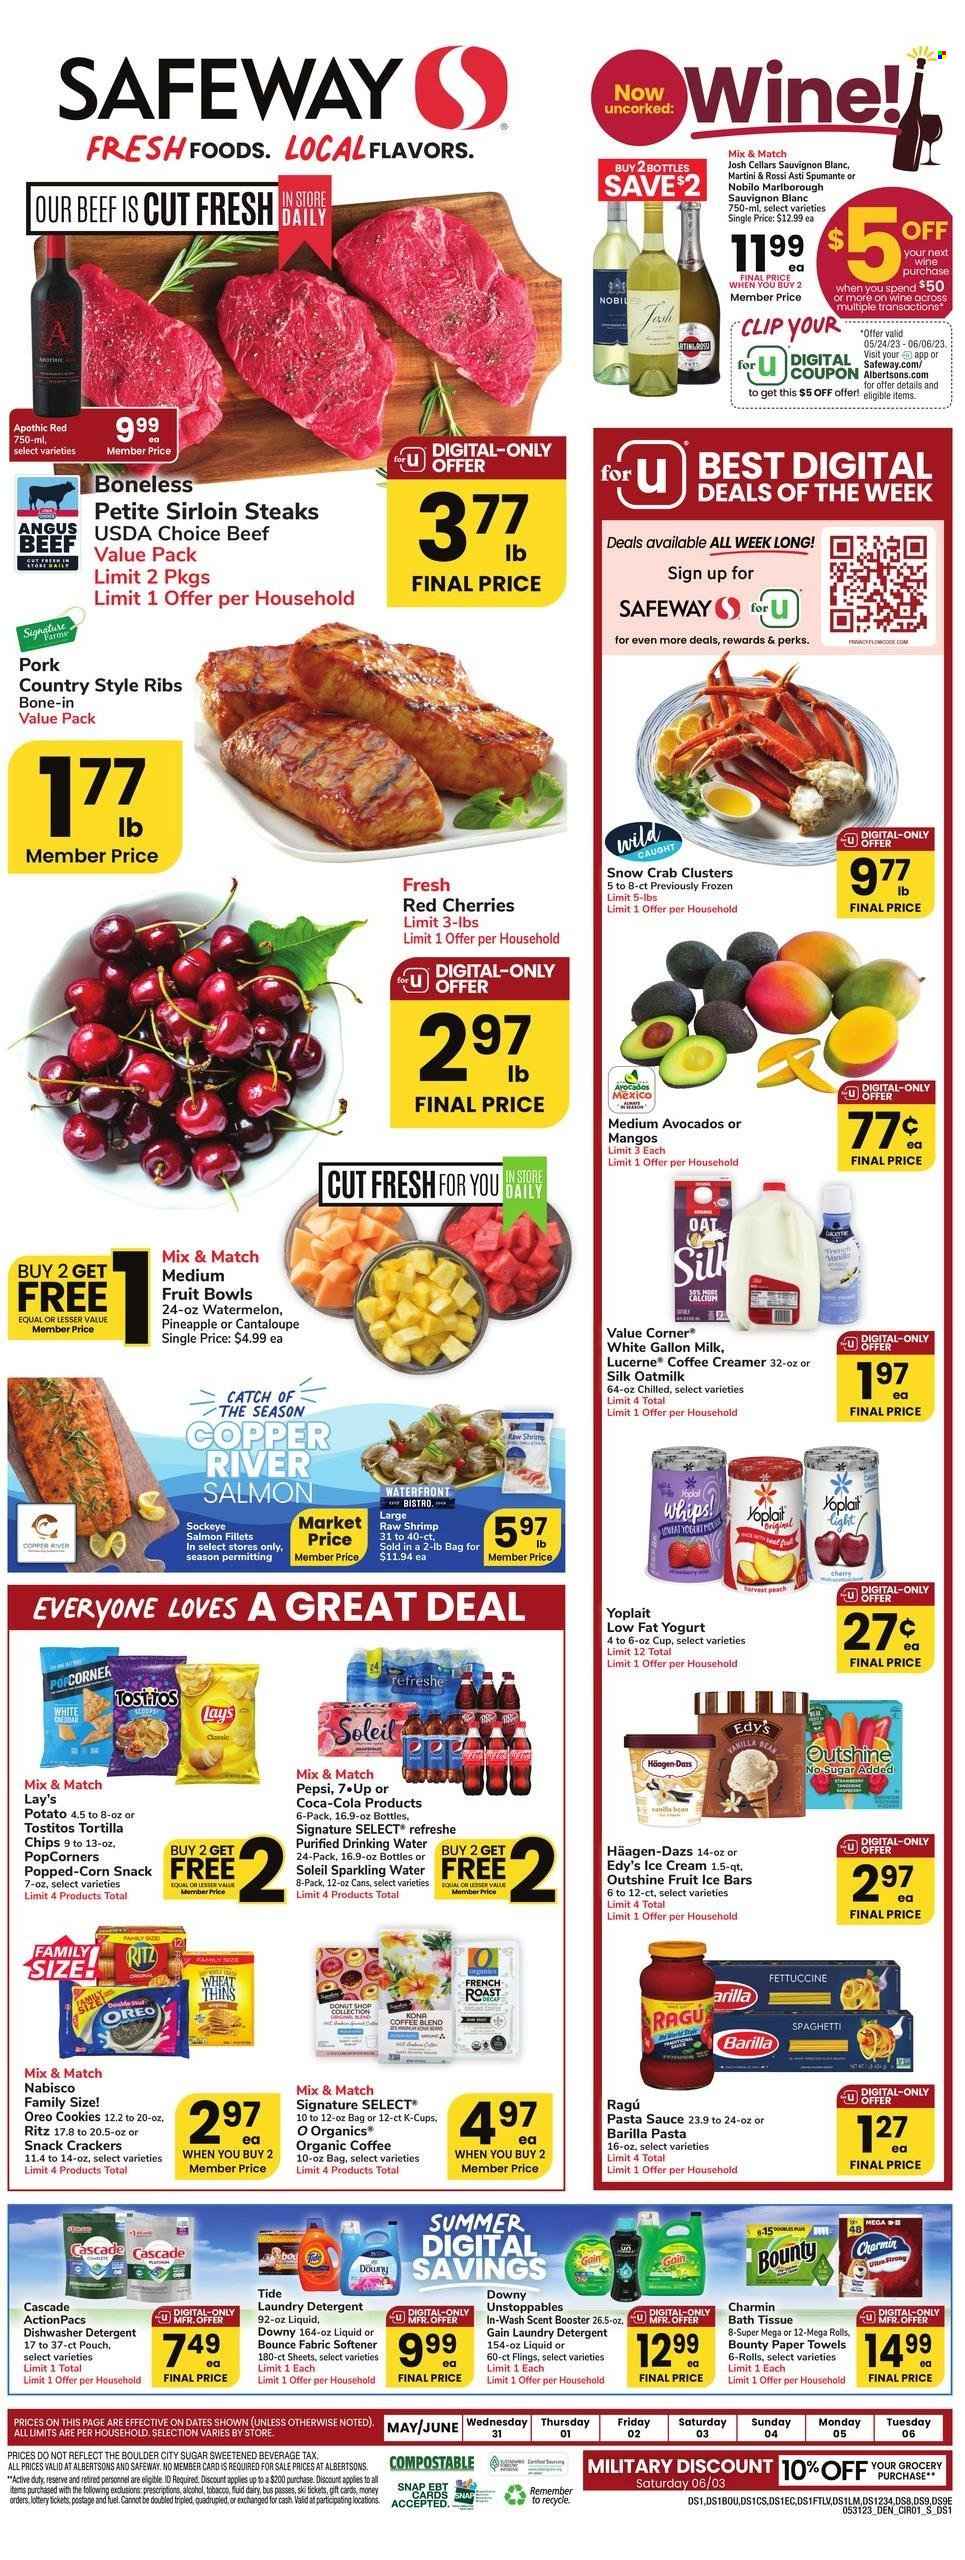 thumbnail - Safeway Flyer - 05/31/2023 - 06/06/2023 - Sales products - avocado, watermelon, cherries, fruit cup, beef meat, steak, sirloin steak, ribs, roast, pork ribs, country style ribs, salmon fillet, crab, shrimps, crab clusters, spaghetti, pasta sauce, sauce, Barilla, ragú pasta, snack, Oreo, Yoplait, milk, Silk, oat milk, creamer, ice cream, Häagen-Dazs, cookies, Bounty, crackers, RITZ, Nabisco, tortilla chips, Lay’s, Thins, popcorn, Tostitos, oats, ragu, Coca-Cola, Pepsi, soft drink, sparkling water, water, organic coffee, coffee capsules, K-Cups, sparkling wine, spumante, white wine, wine, Sauvignon Blanc, Martini, bath tissue, kitchen towels, paper towels, Charmin, detergent, Gain, Cascade, Tide, fabric softener, laundry detergent, Bounce, dishwasher tablets. Page 1.